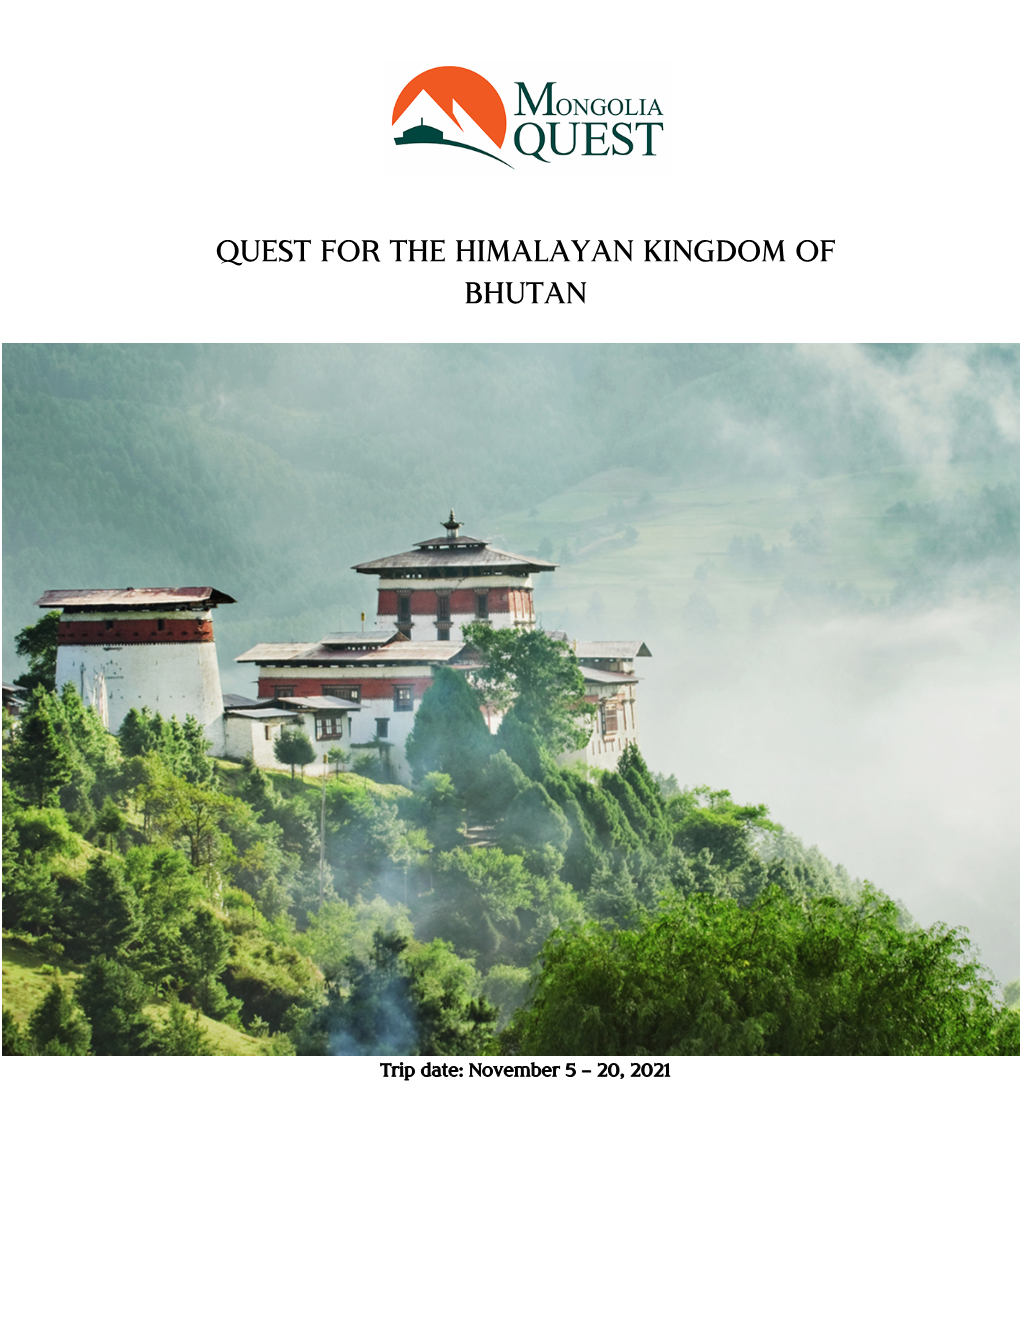 Quest for the Himalayan Kingdom of Bhutan